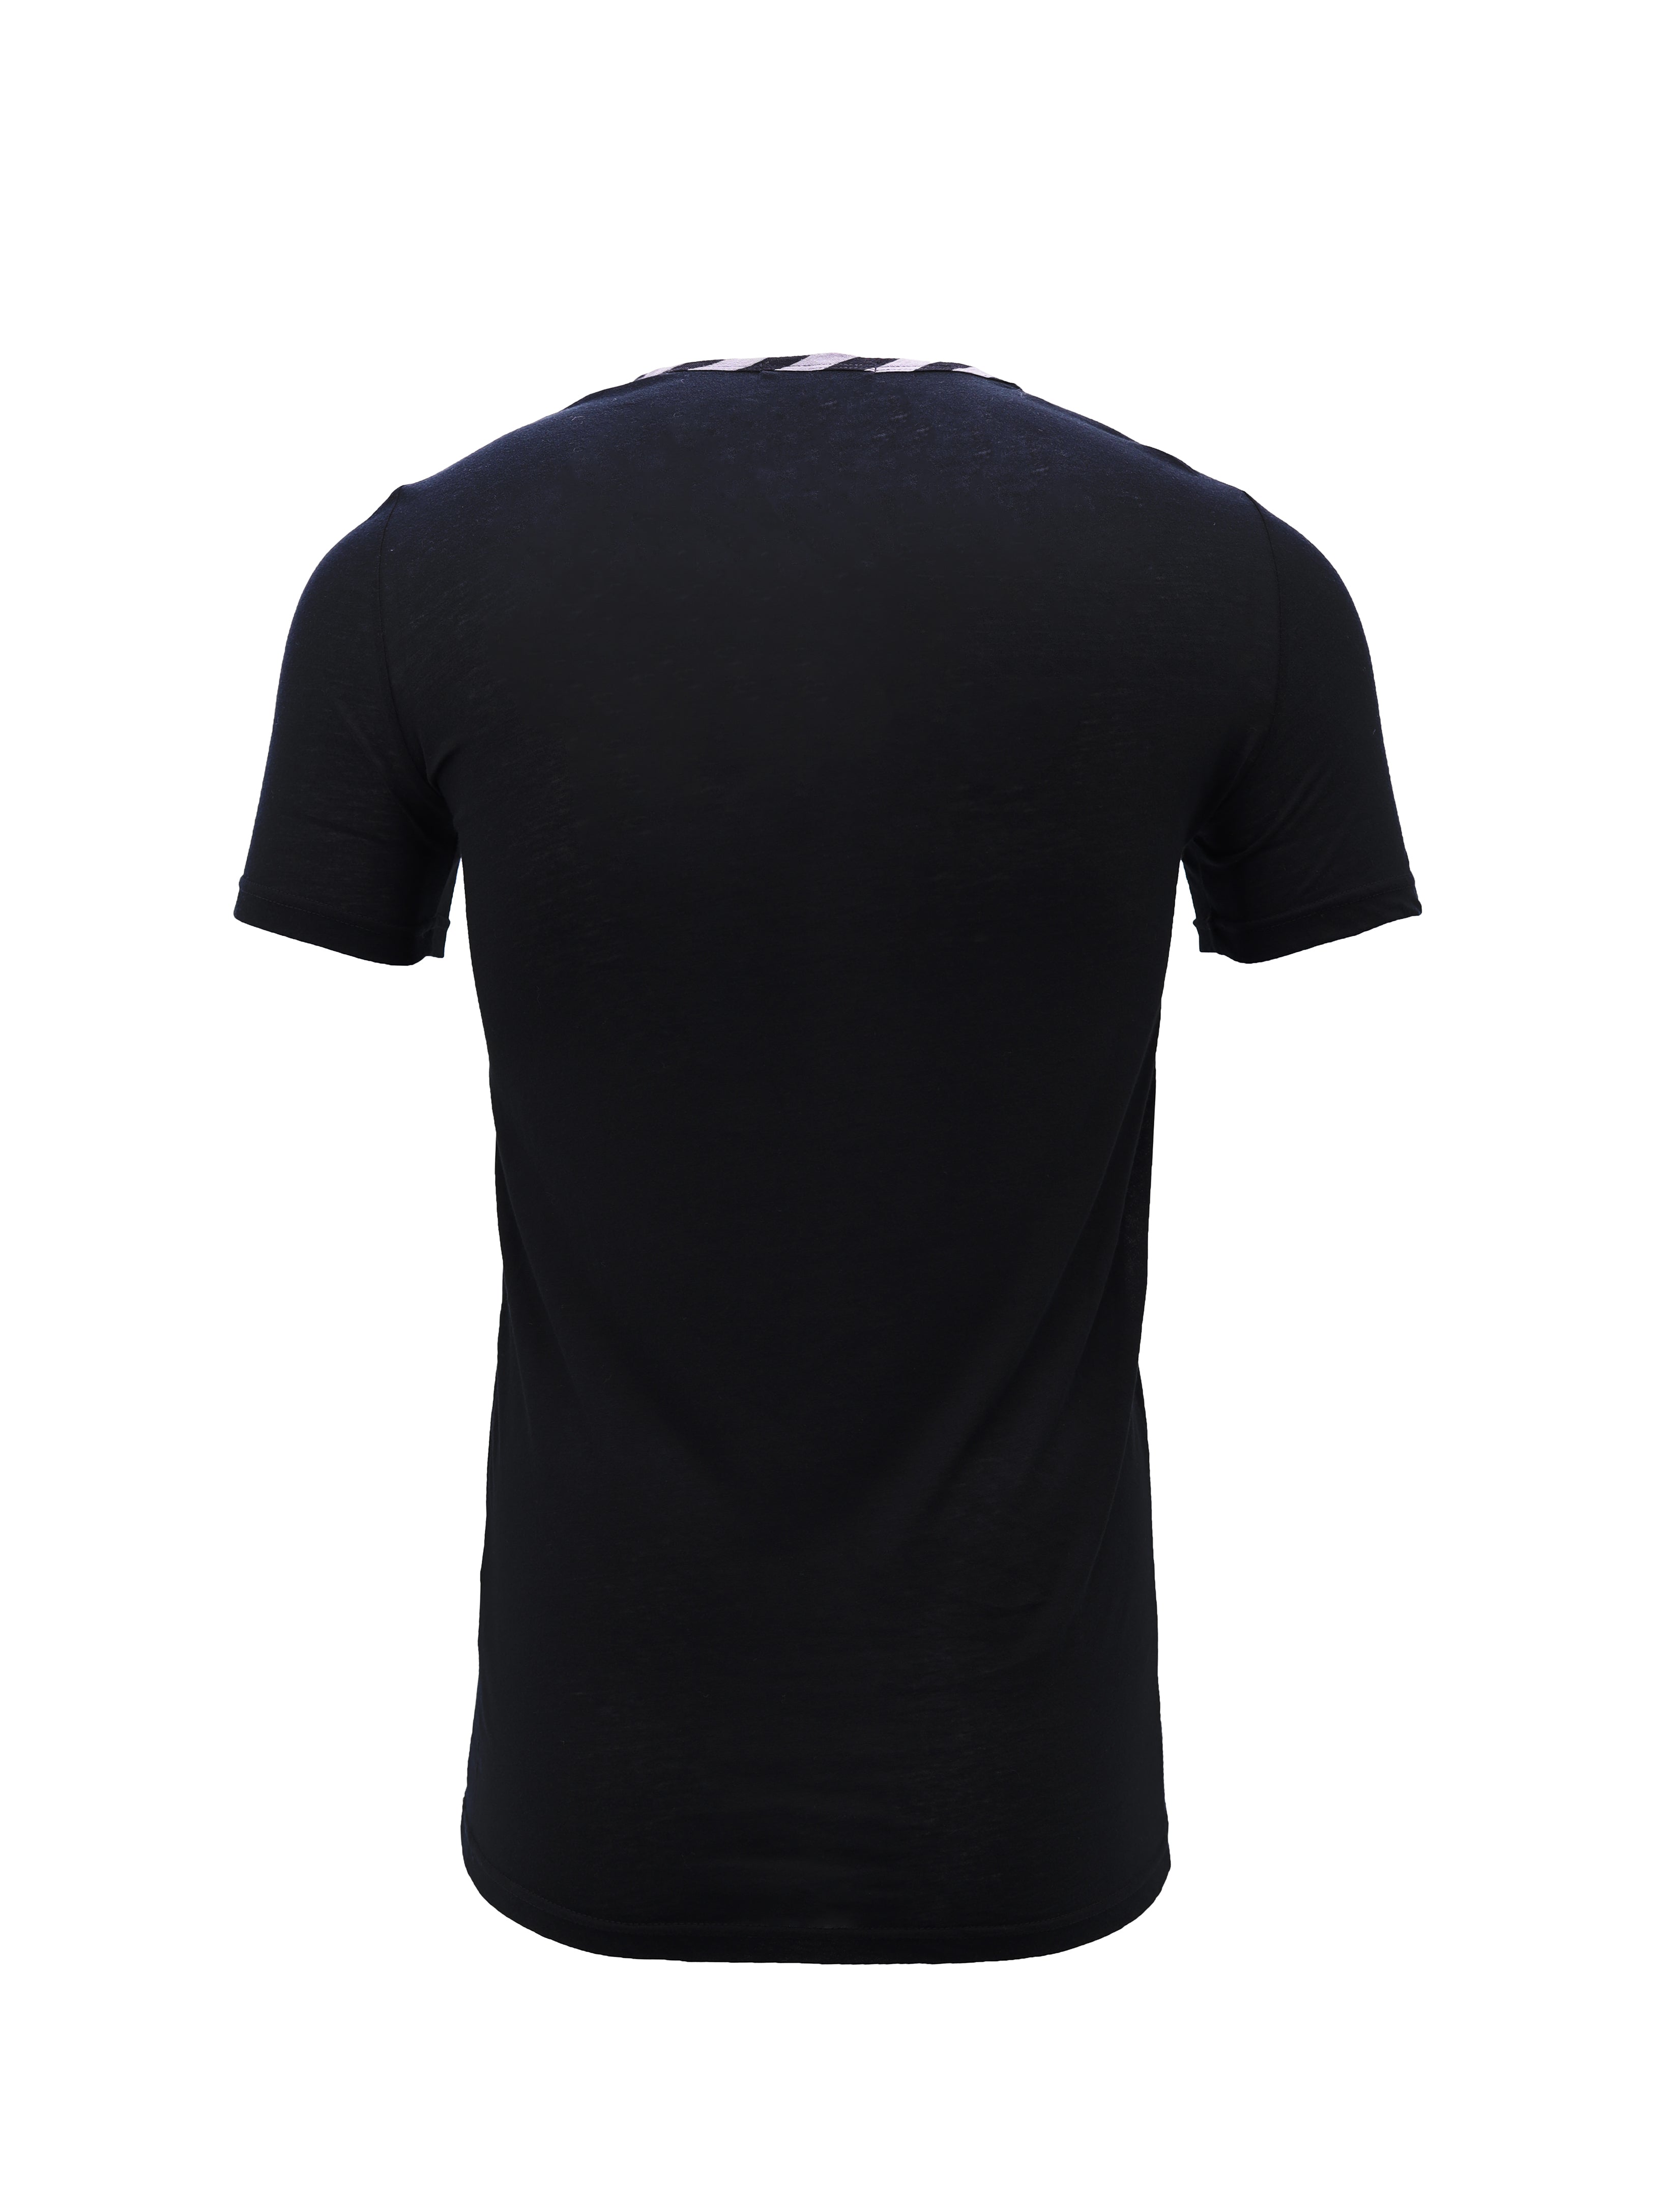 BLACK AND STRIPED SWOOP LAYERED T-SHIRT